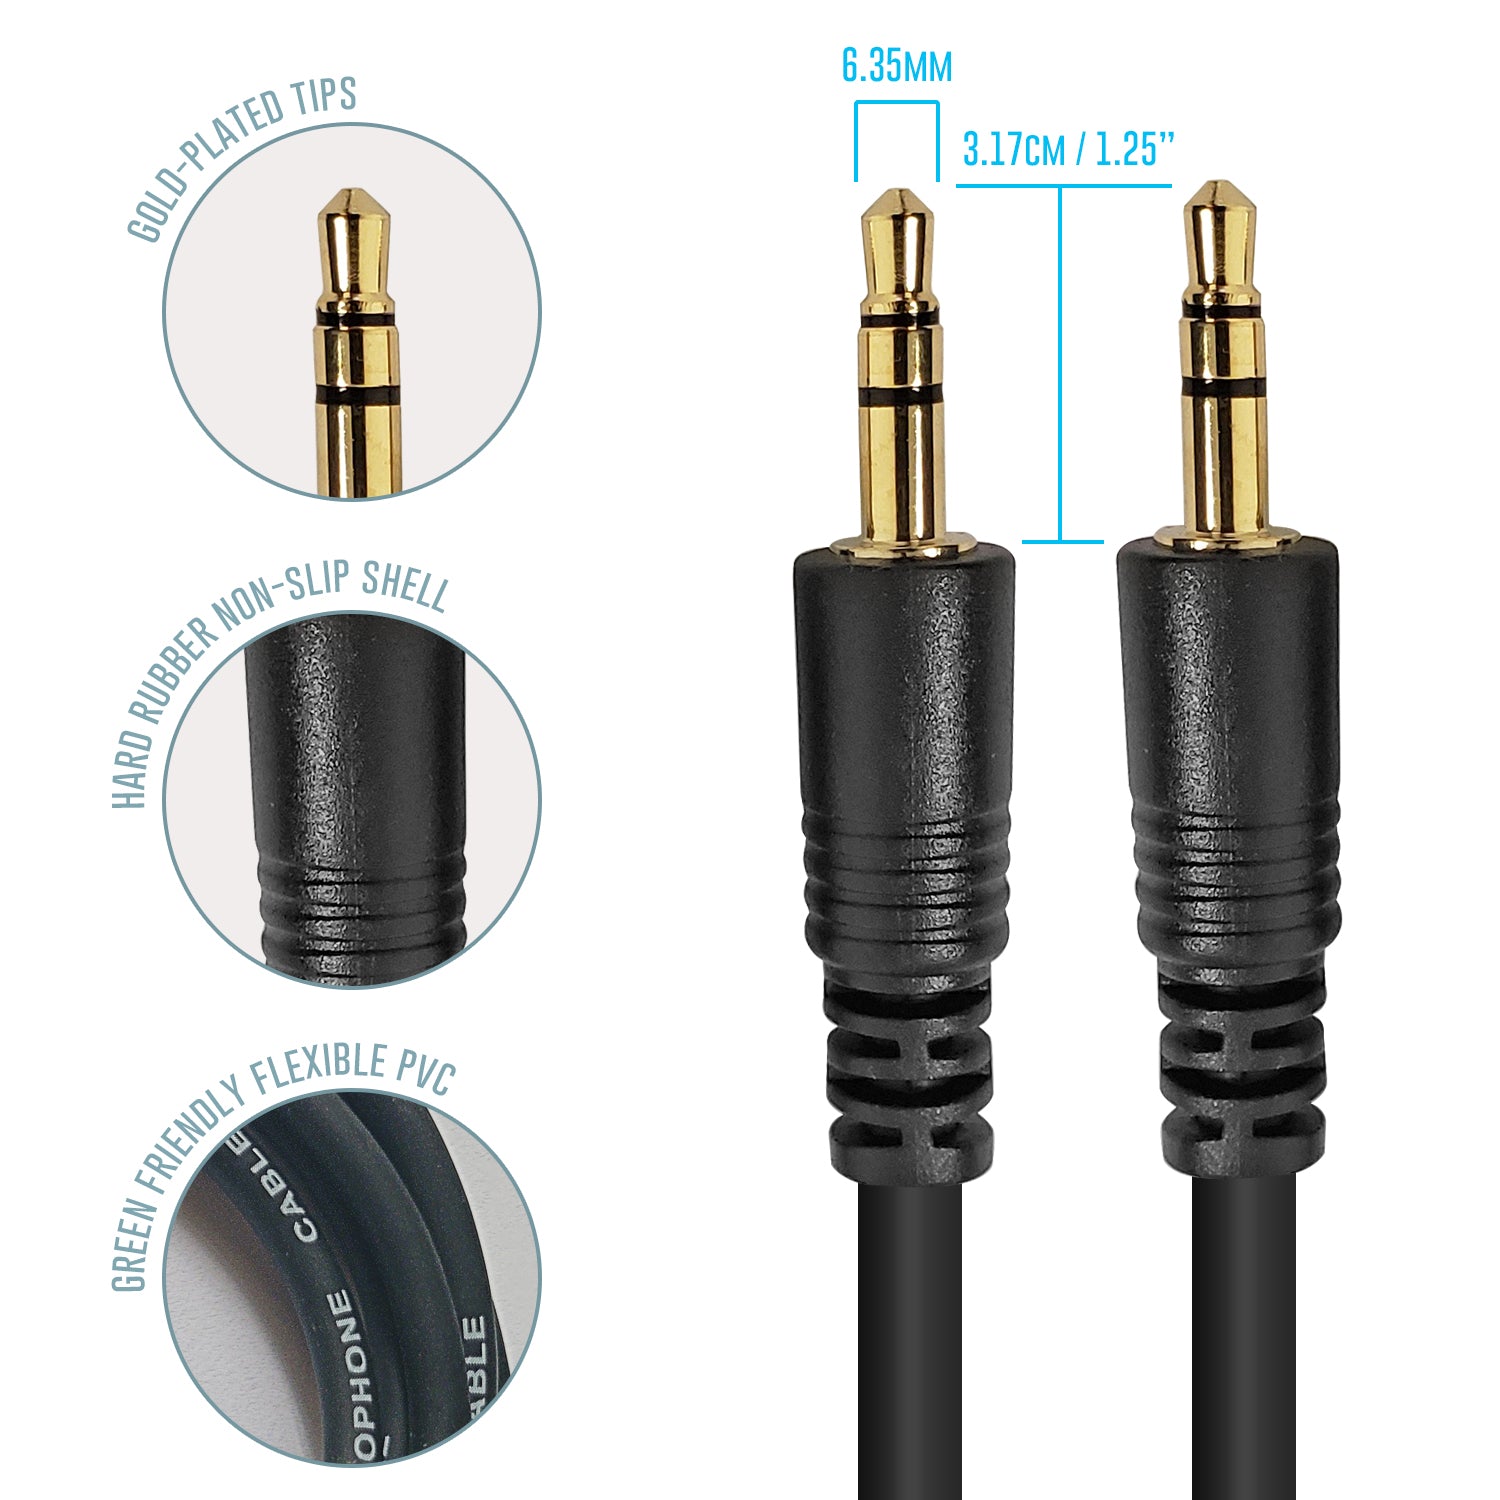 AxcessAbles XLR to 1/4 Inch TRS Instrument Cable 10ft | XLR Female to